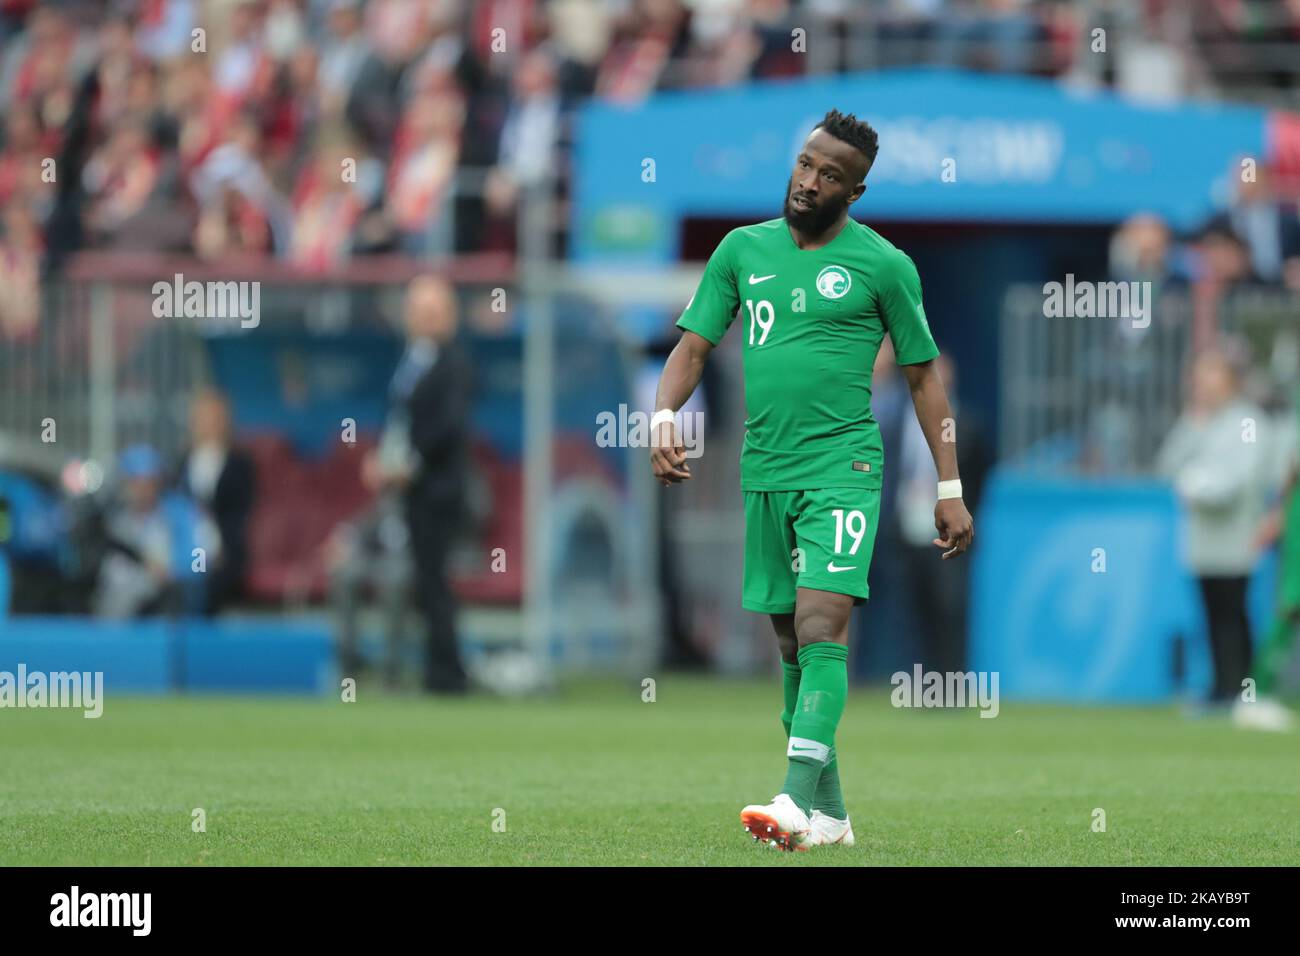 Forward Fahad Almuwallad of Saudi Arabia National team during Group A match between Russia and Saudi Arabia at the 2018 soccer World Cup at Luzhniki stadium in Moscow, Russia, Tuesday, June 14, 2018. (Photo by Anatolij Medved/NurPhoto) Stock Photo